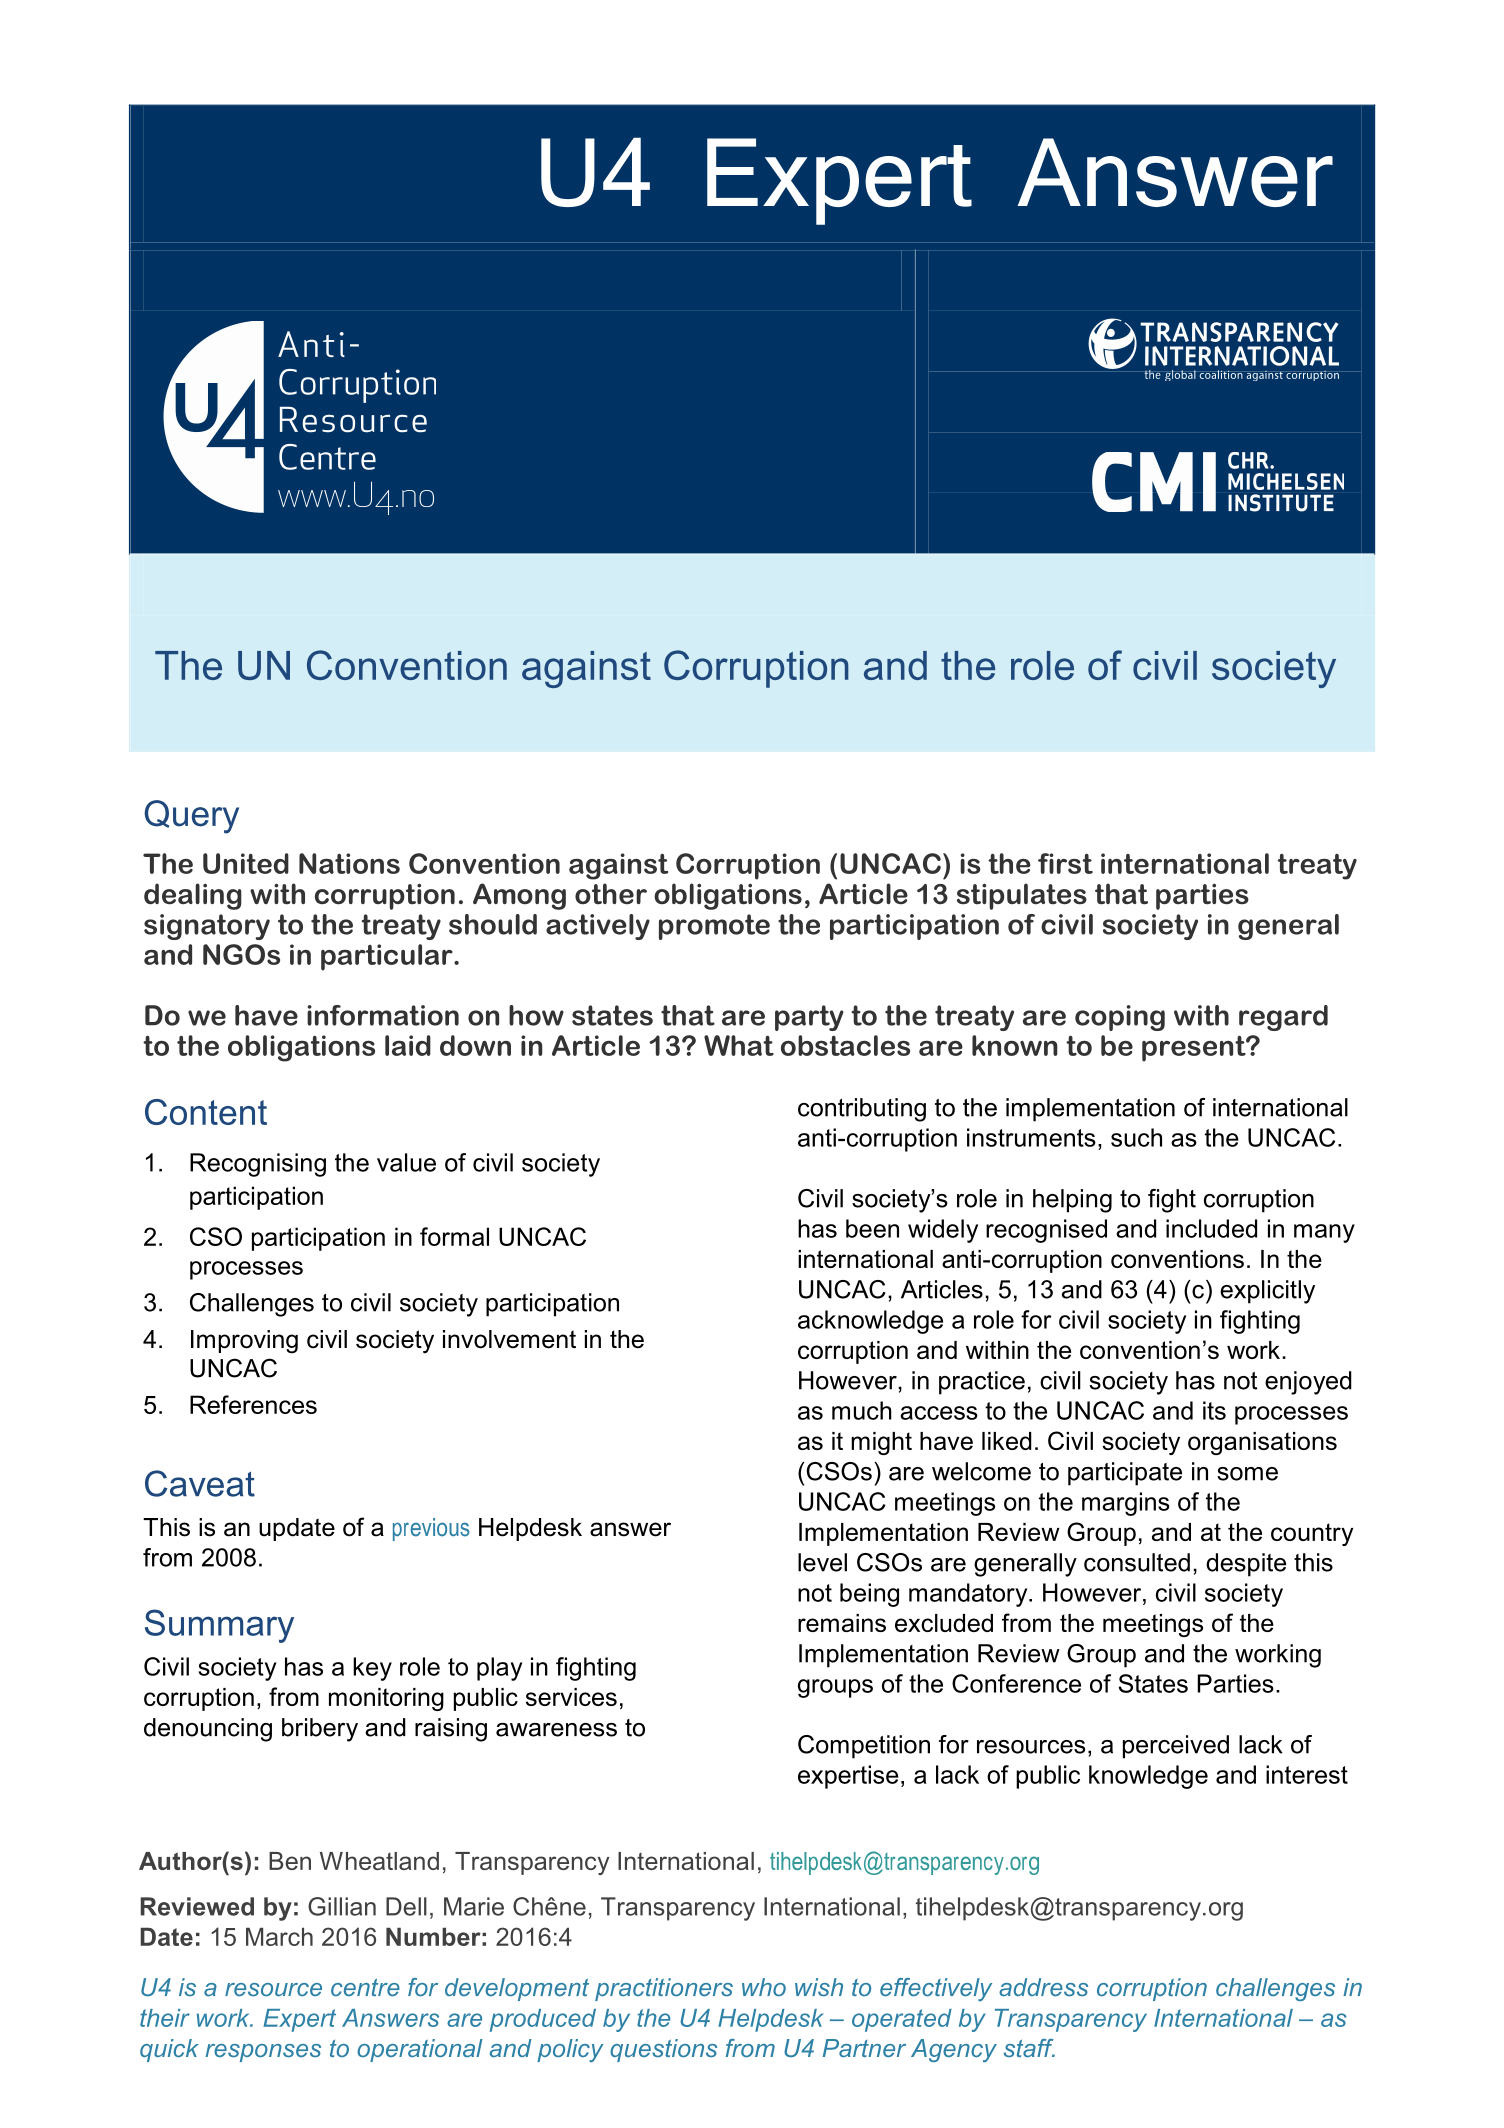 The UN Convention against Corruption and the role of civil society